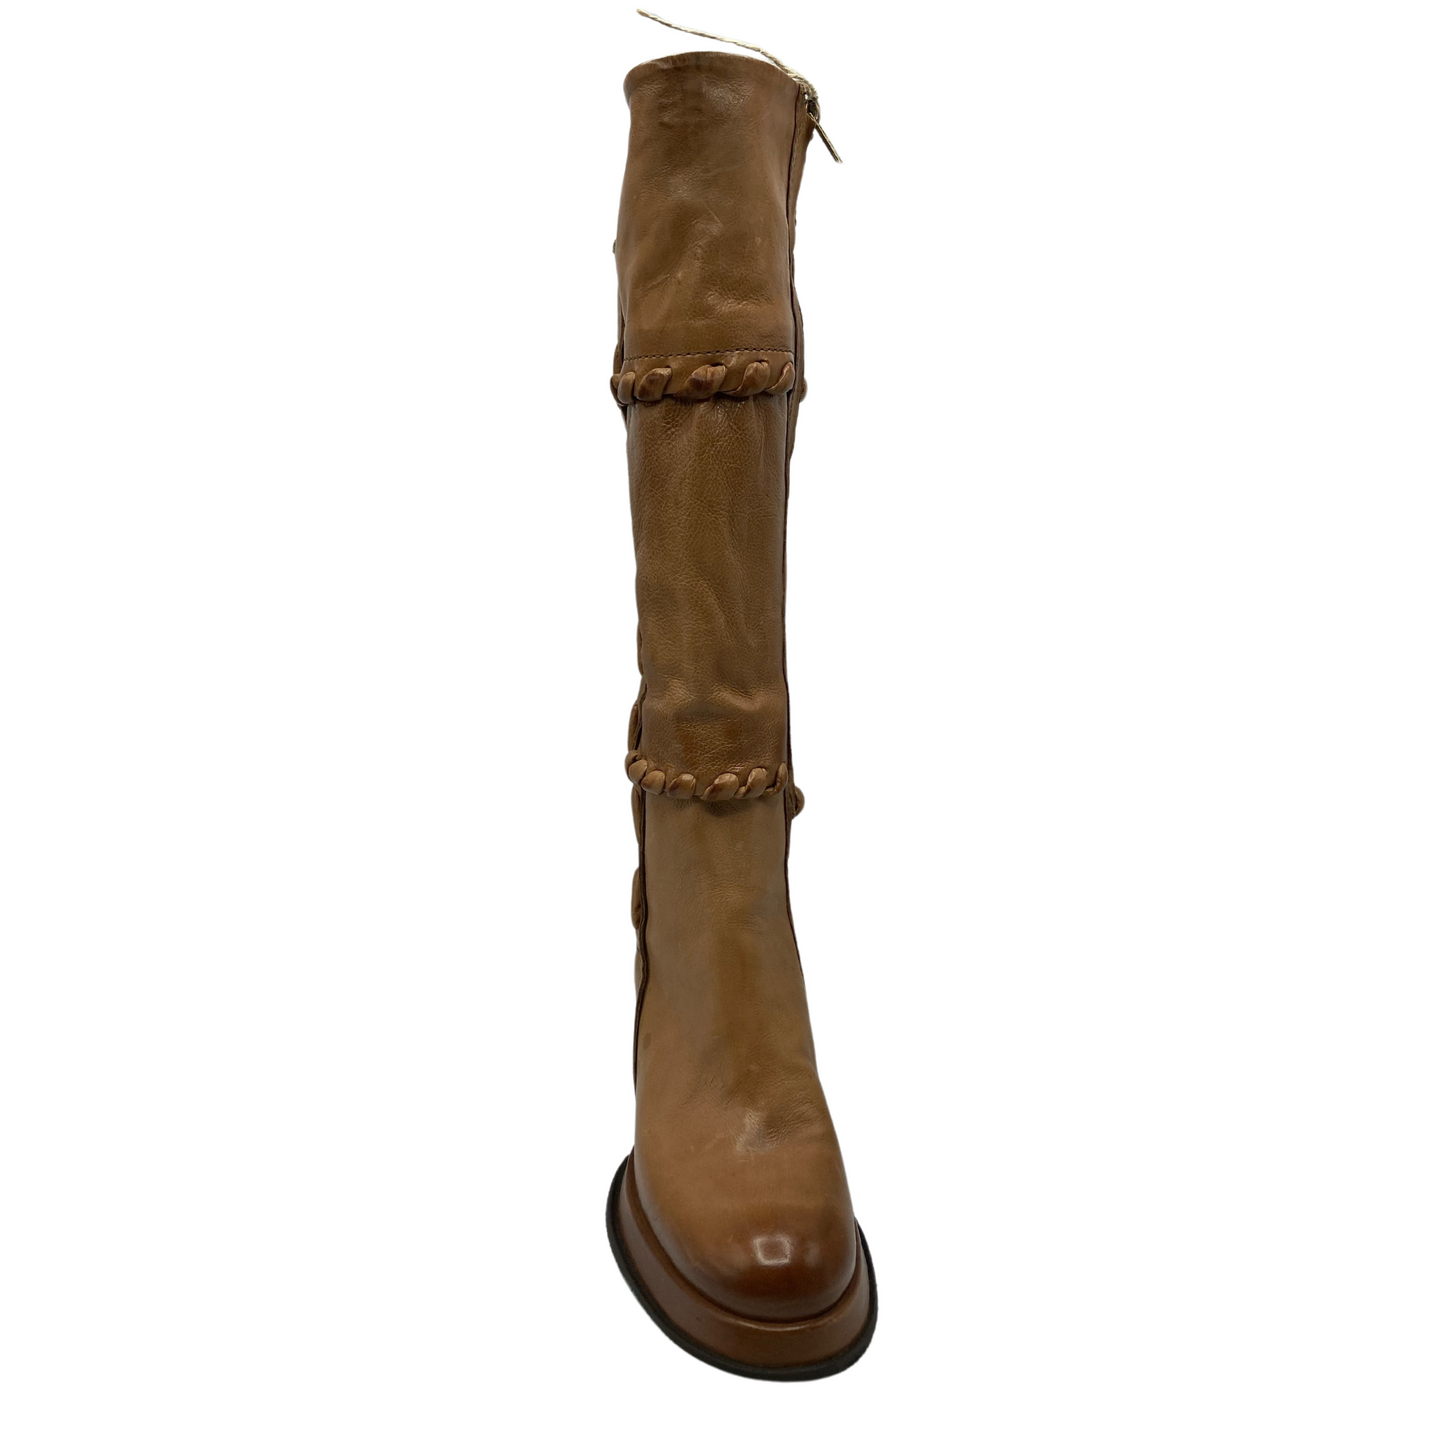 Front view of brown leather knee high boot with rounded toe and side zipper closure